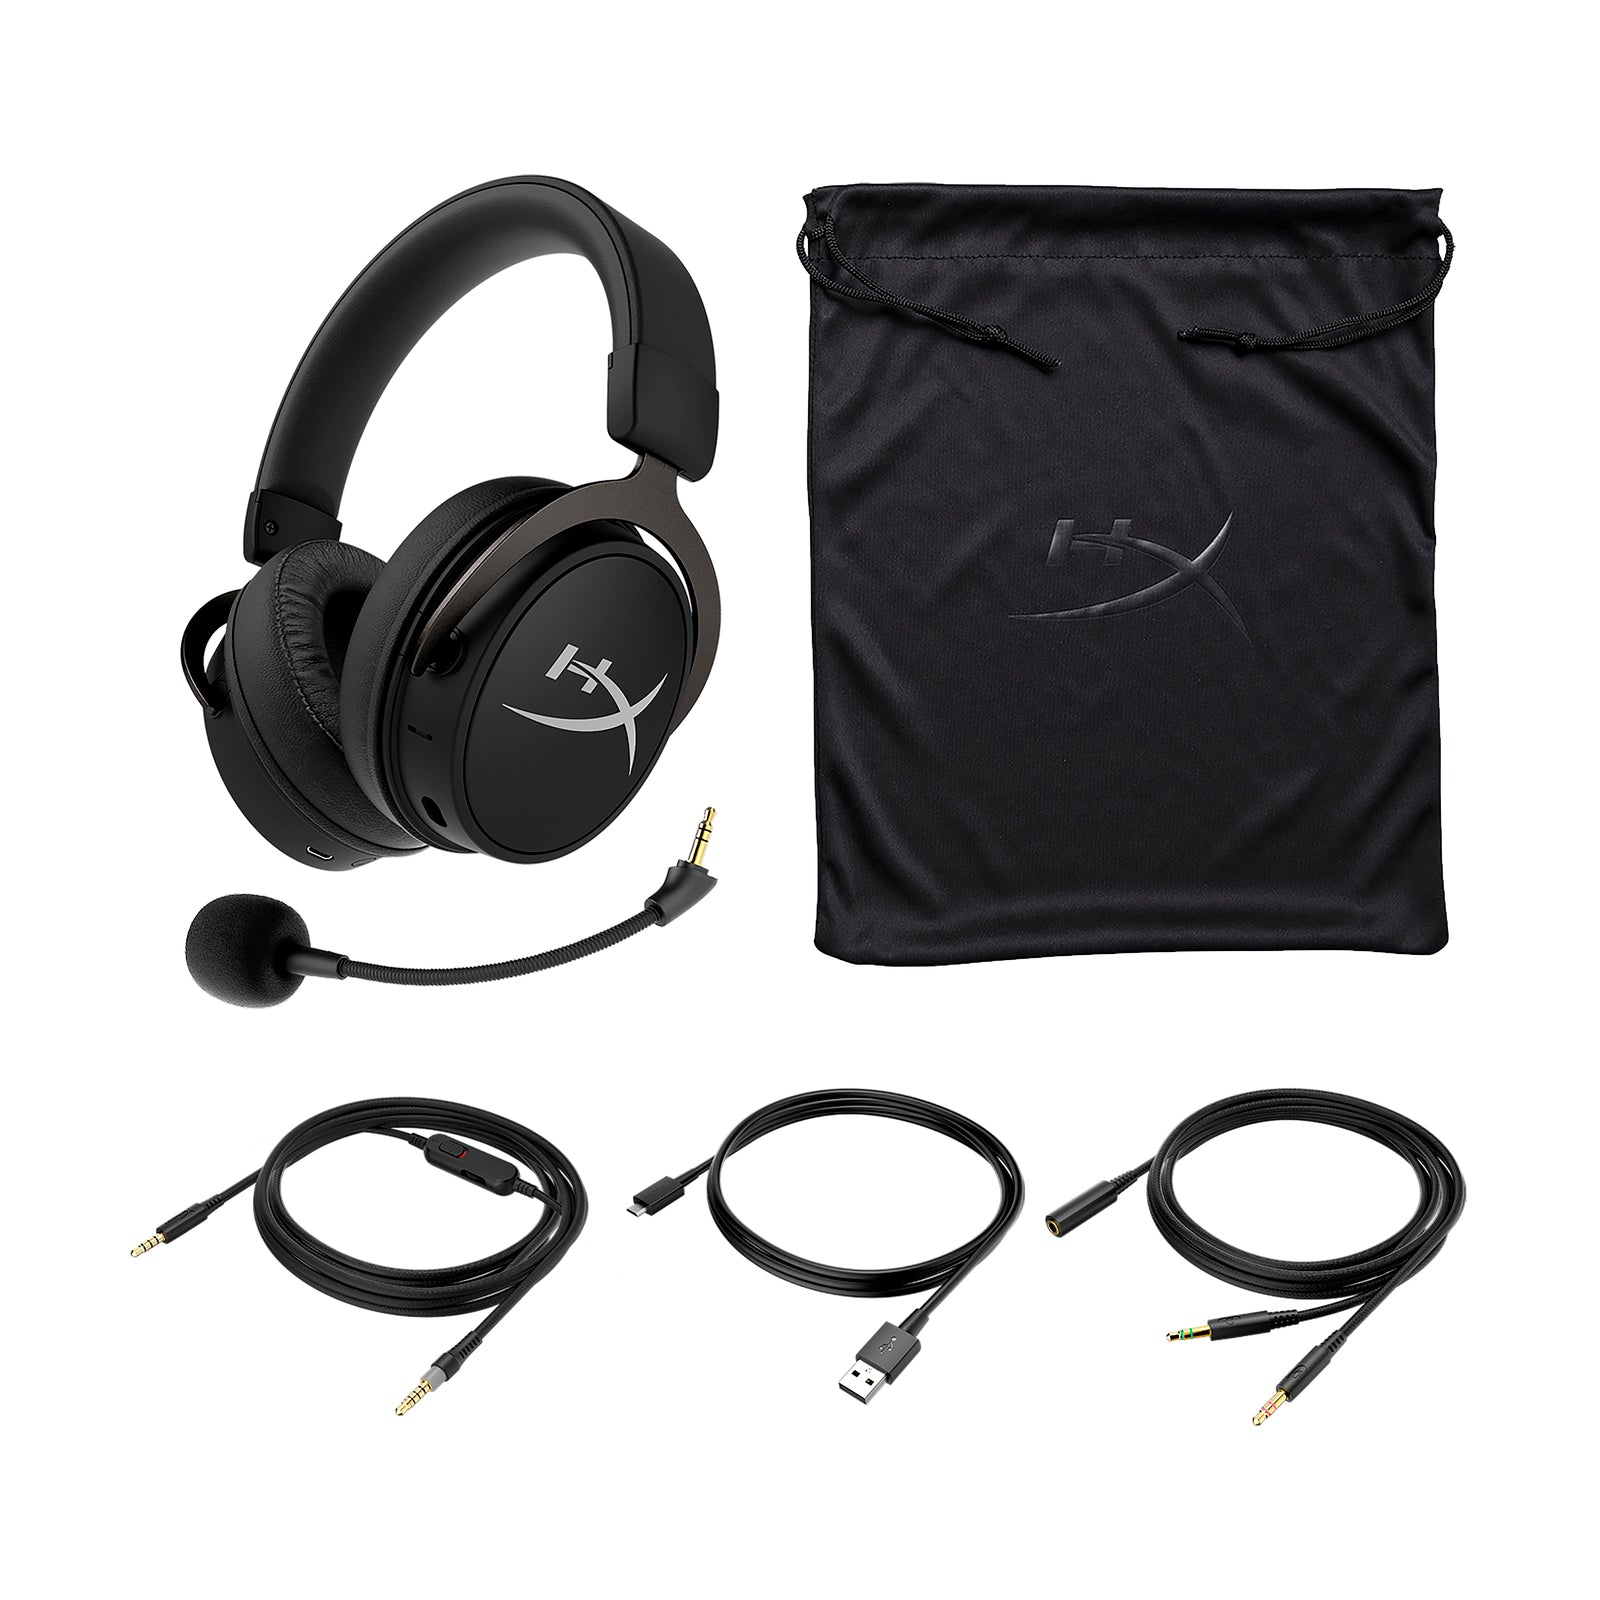 MIX Bluetooth ROW HyperX Cloud and – HyperX | Headset – Gaming Wired Headphones